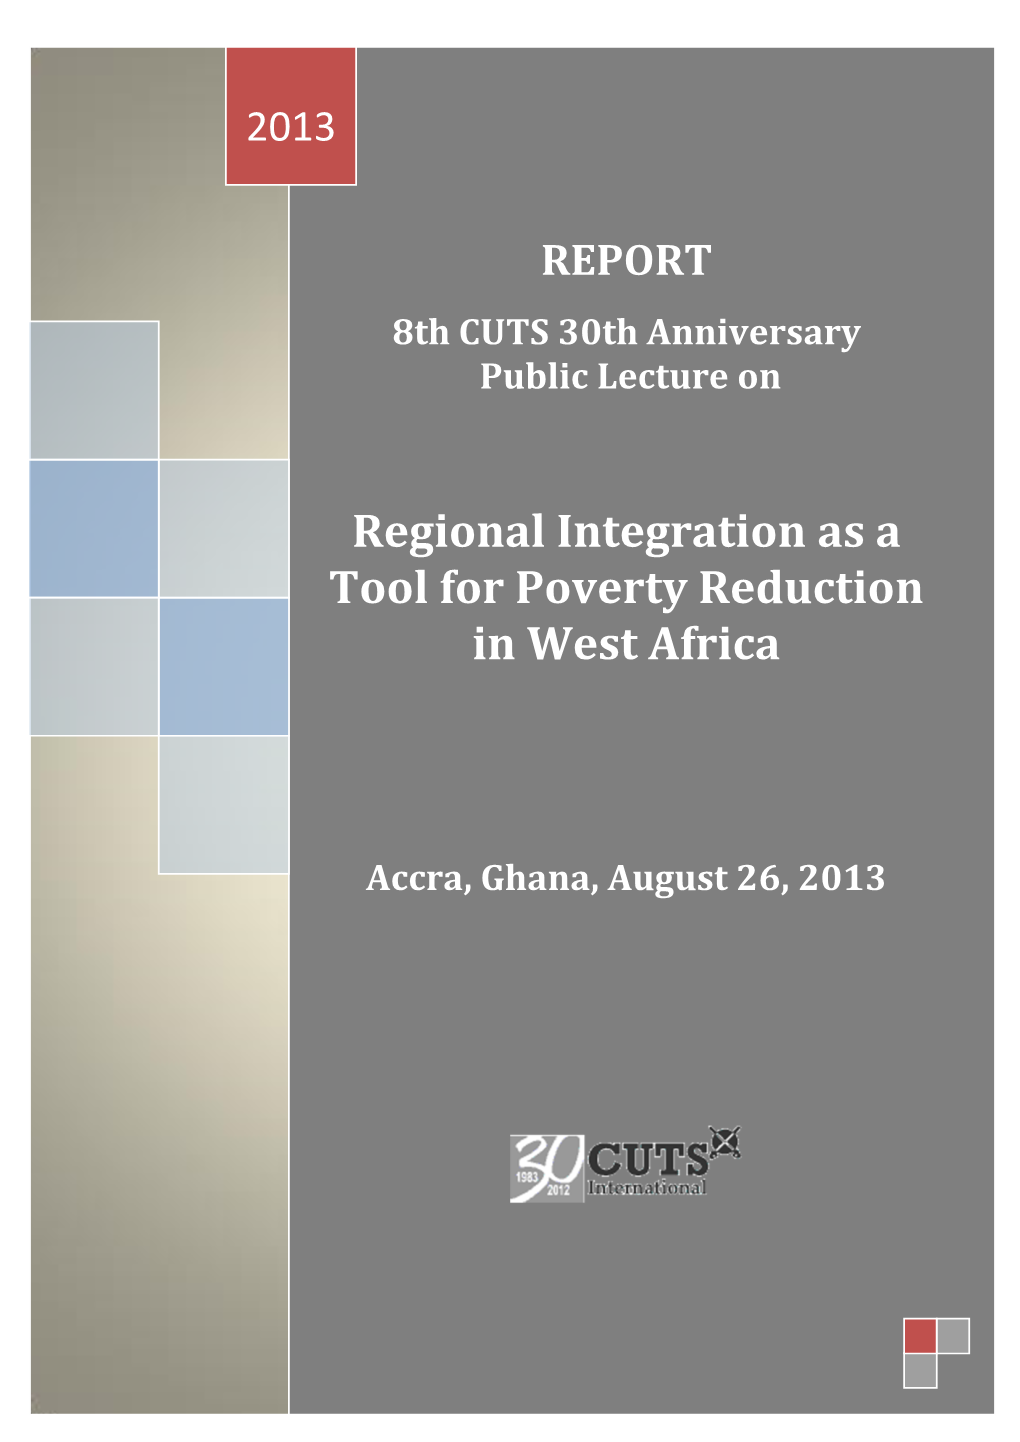 Regional Integration As a Tool for Poverty Reduction in West Africa Regional Integration As a Accra, Ghana, Augusttool 26, 2013 for Poverty Reduction